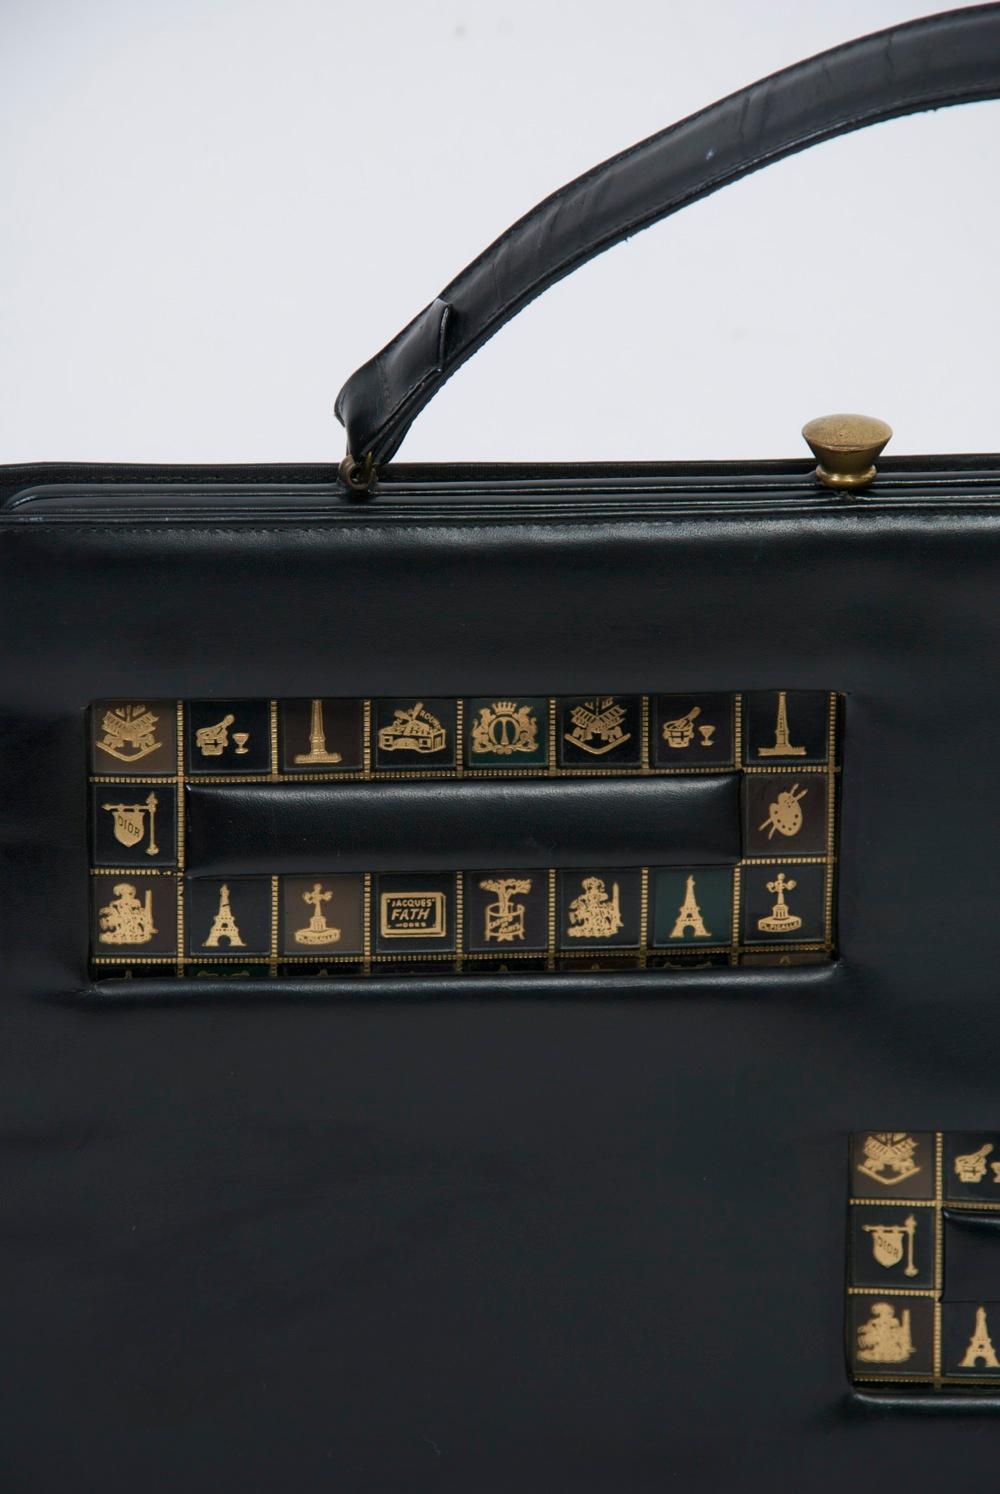 An example of some of the unique large handbags produced in the 1960s, this black leather bag is of rectangular shape and features two offset horizontal sections on the front stamped with gold motifs of Paris, including the Eiffel Tower and two of